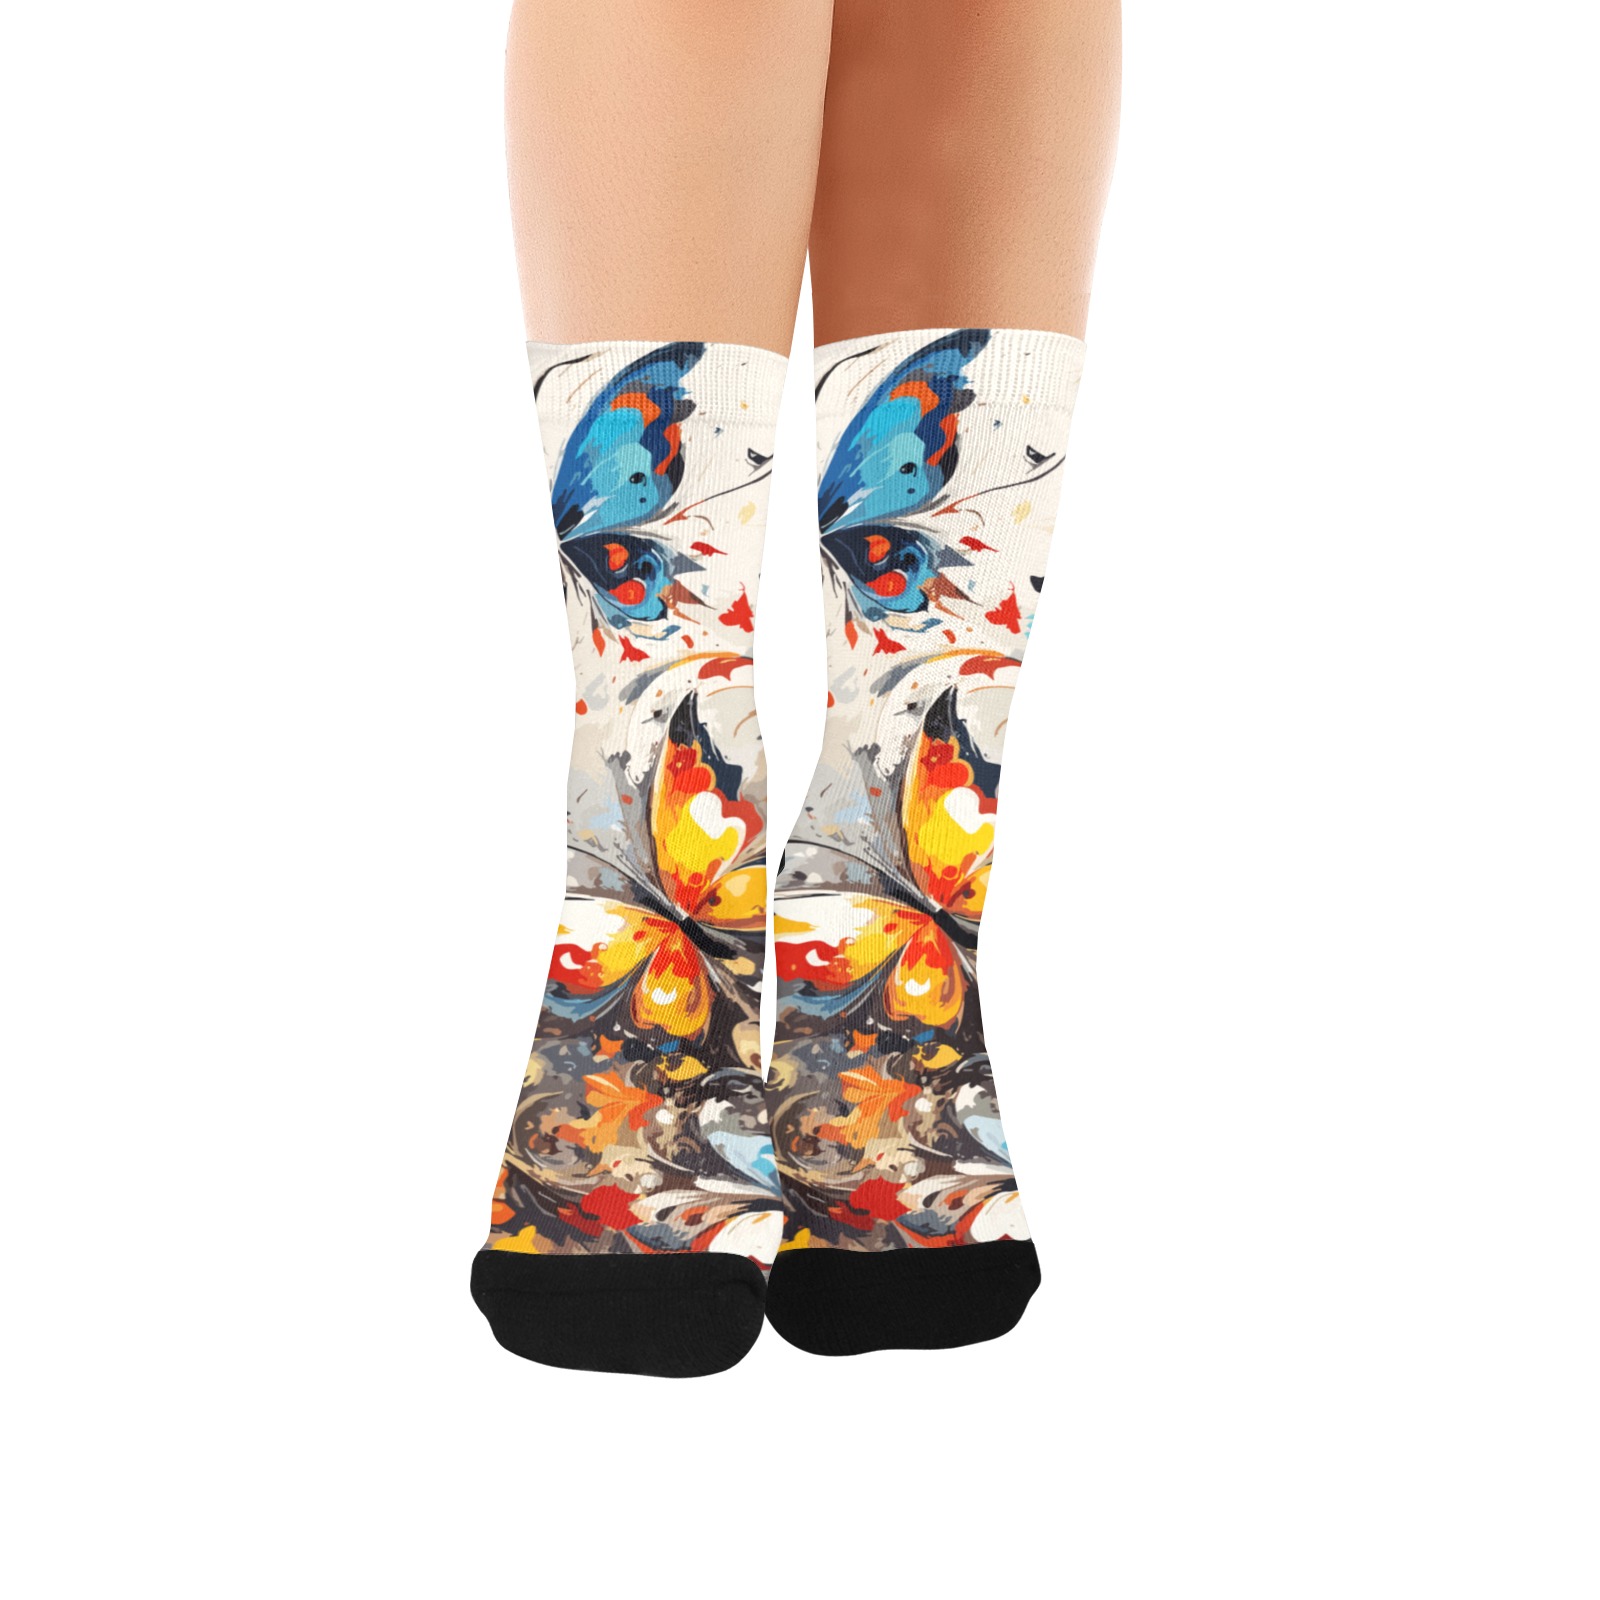 Decorative floral ornament and awesome butterflies Custom Socks for Women